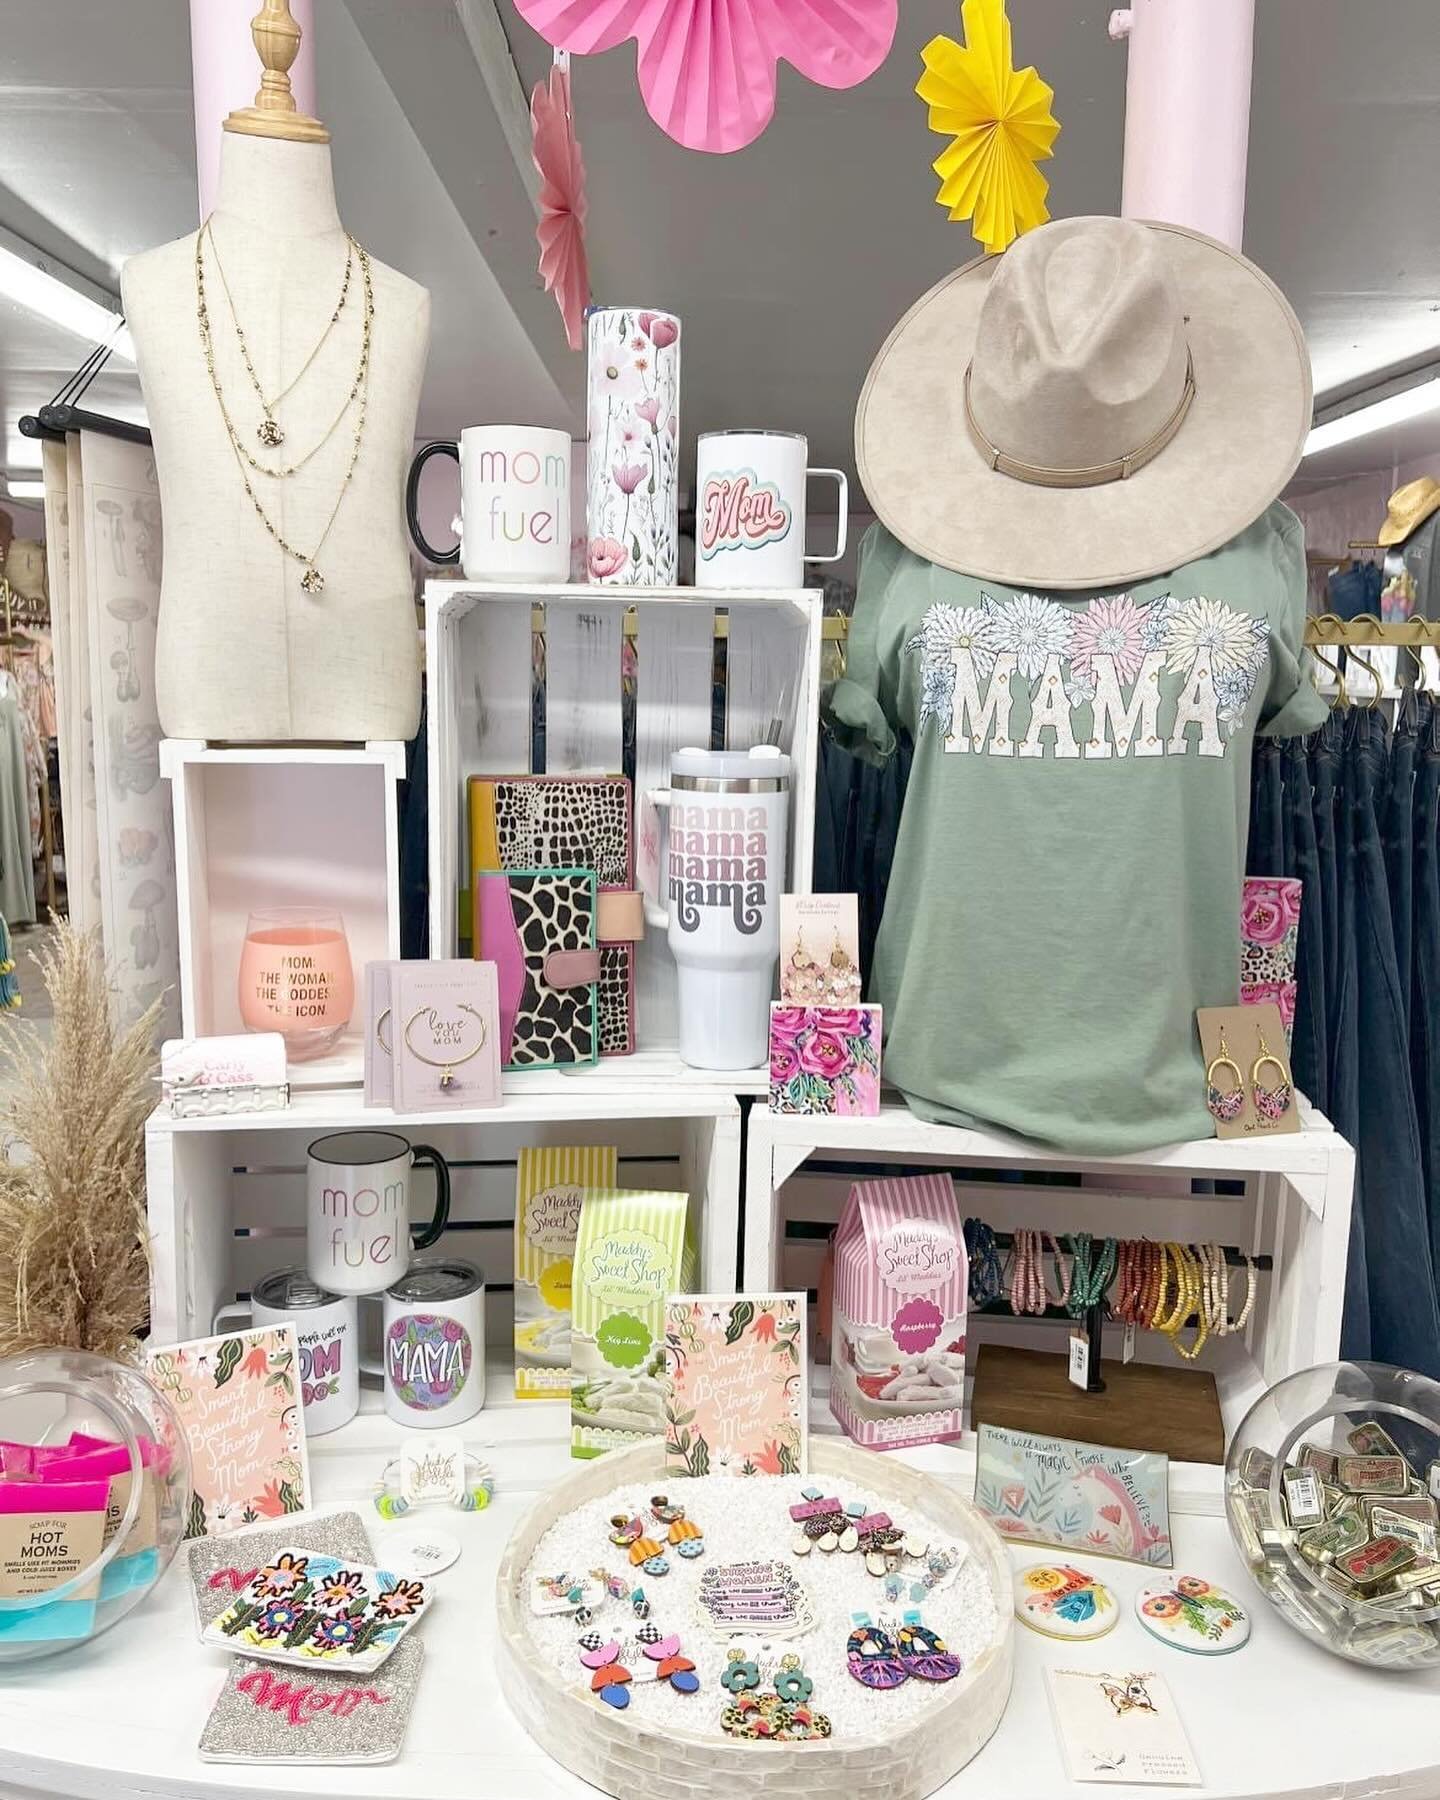 Come shop our boutique for lots of great gifts for Mother&rsquo;s Day! Join us Saturday 5/11 from 10-7 for our Mothers Day celebration! Refreshments, giveaways and permanent jewelry from Jewelry Junkie from 12-6! 💐

🛍️ 561 Mill Street, downtown Syl